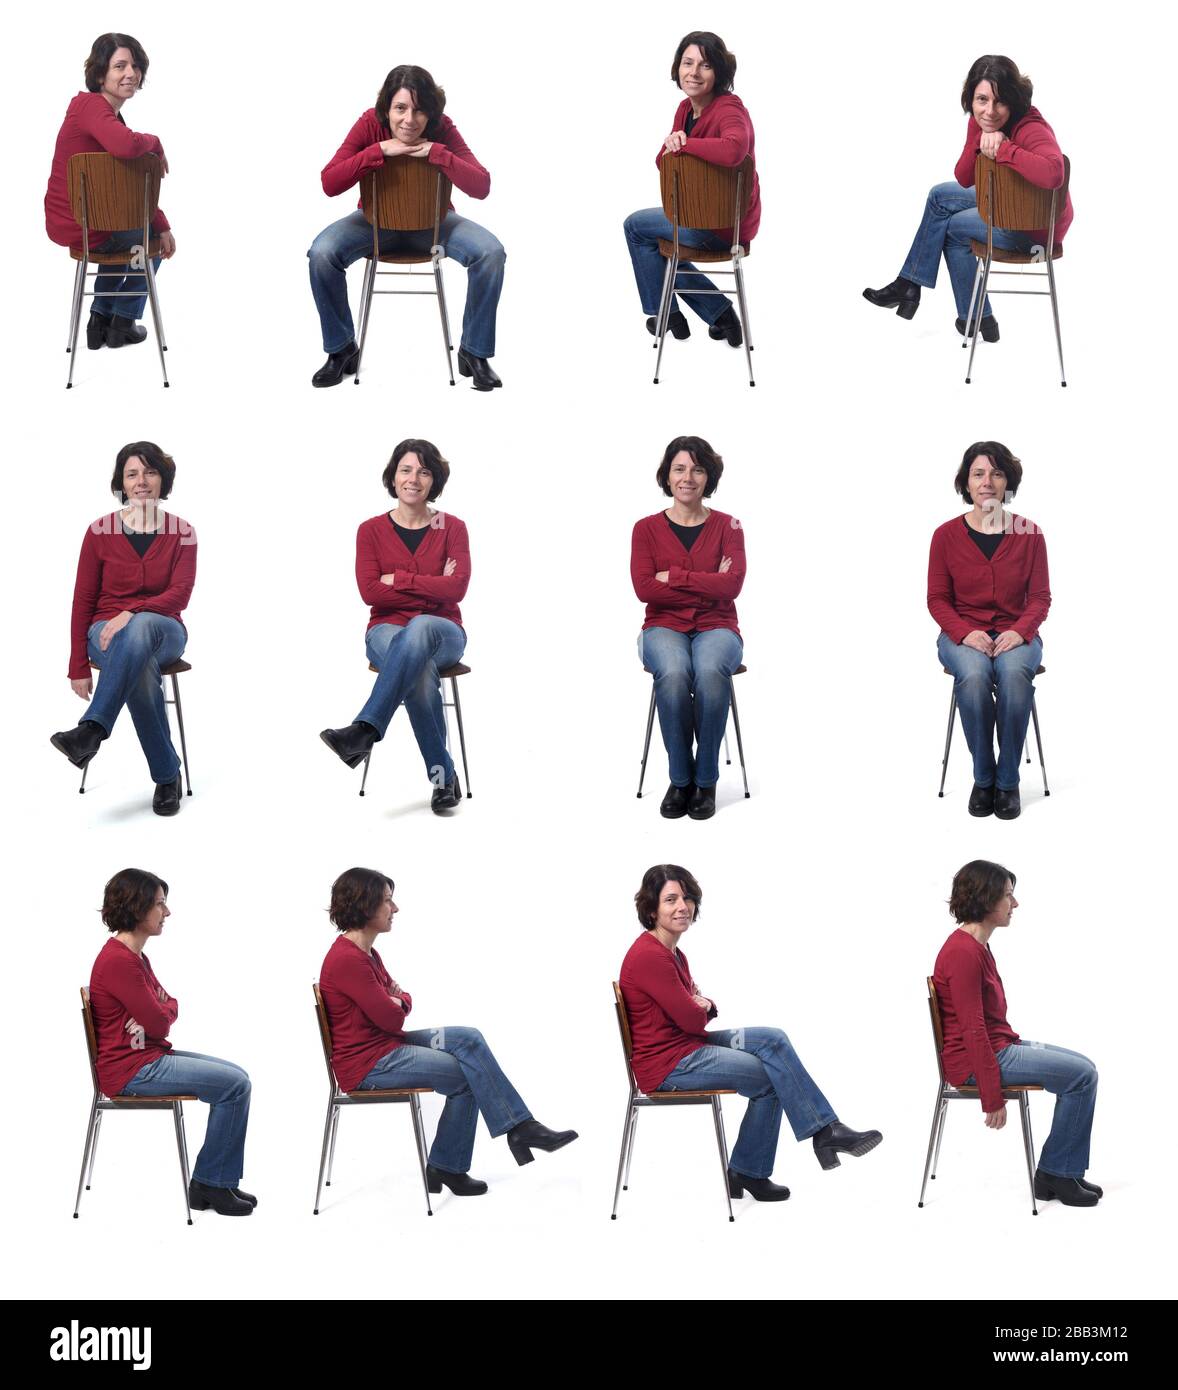 Top more than 76 sitting poses on chair